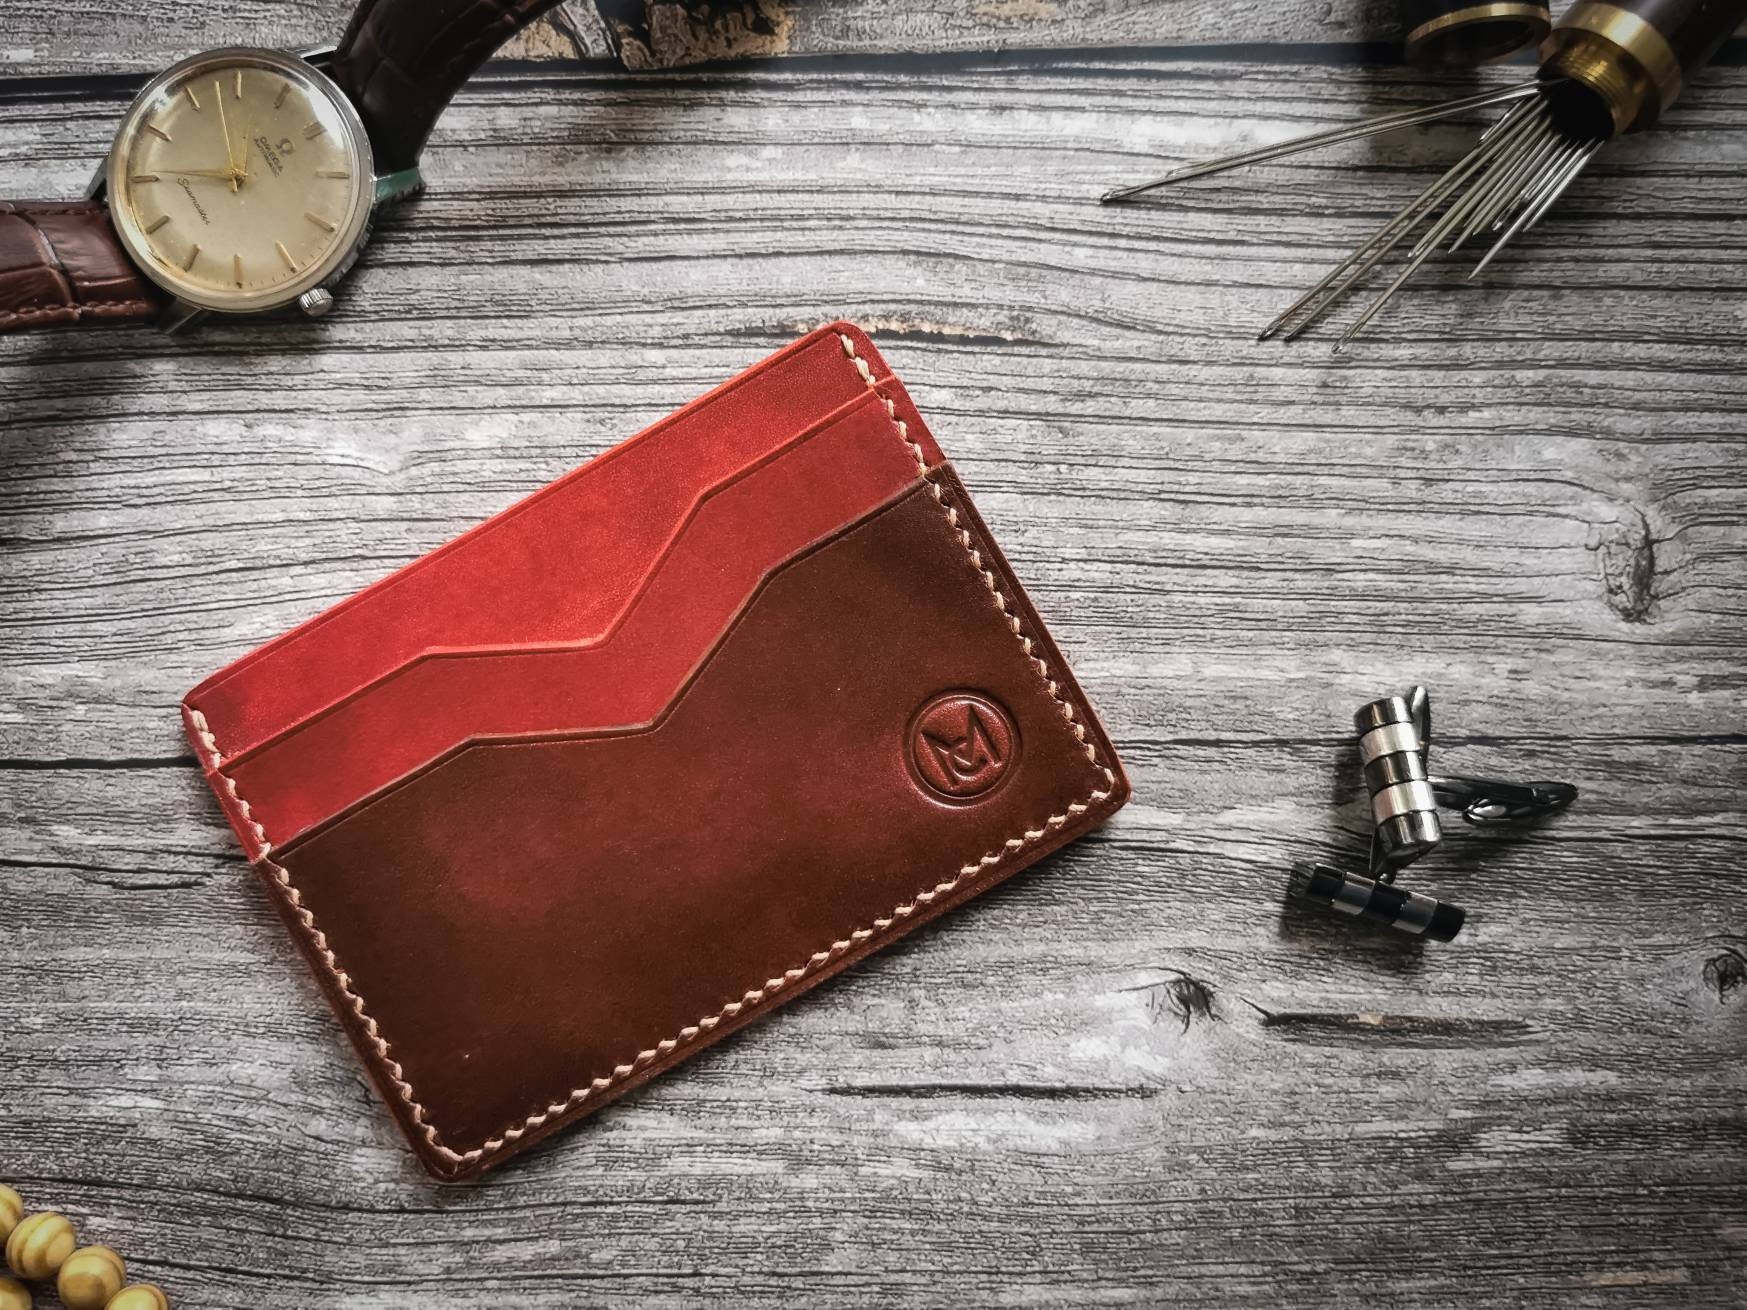 Small Bifold Premium Leather Wallet